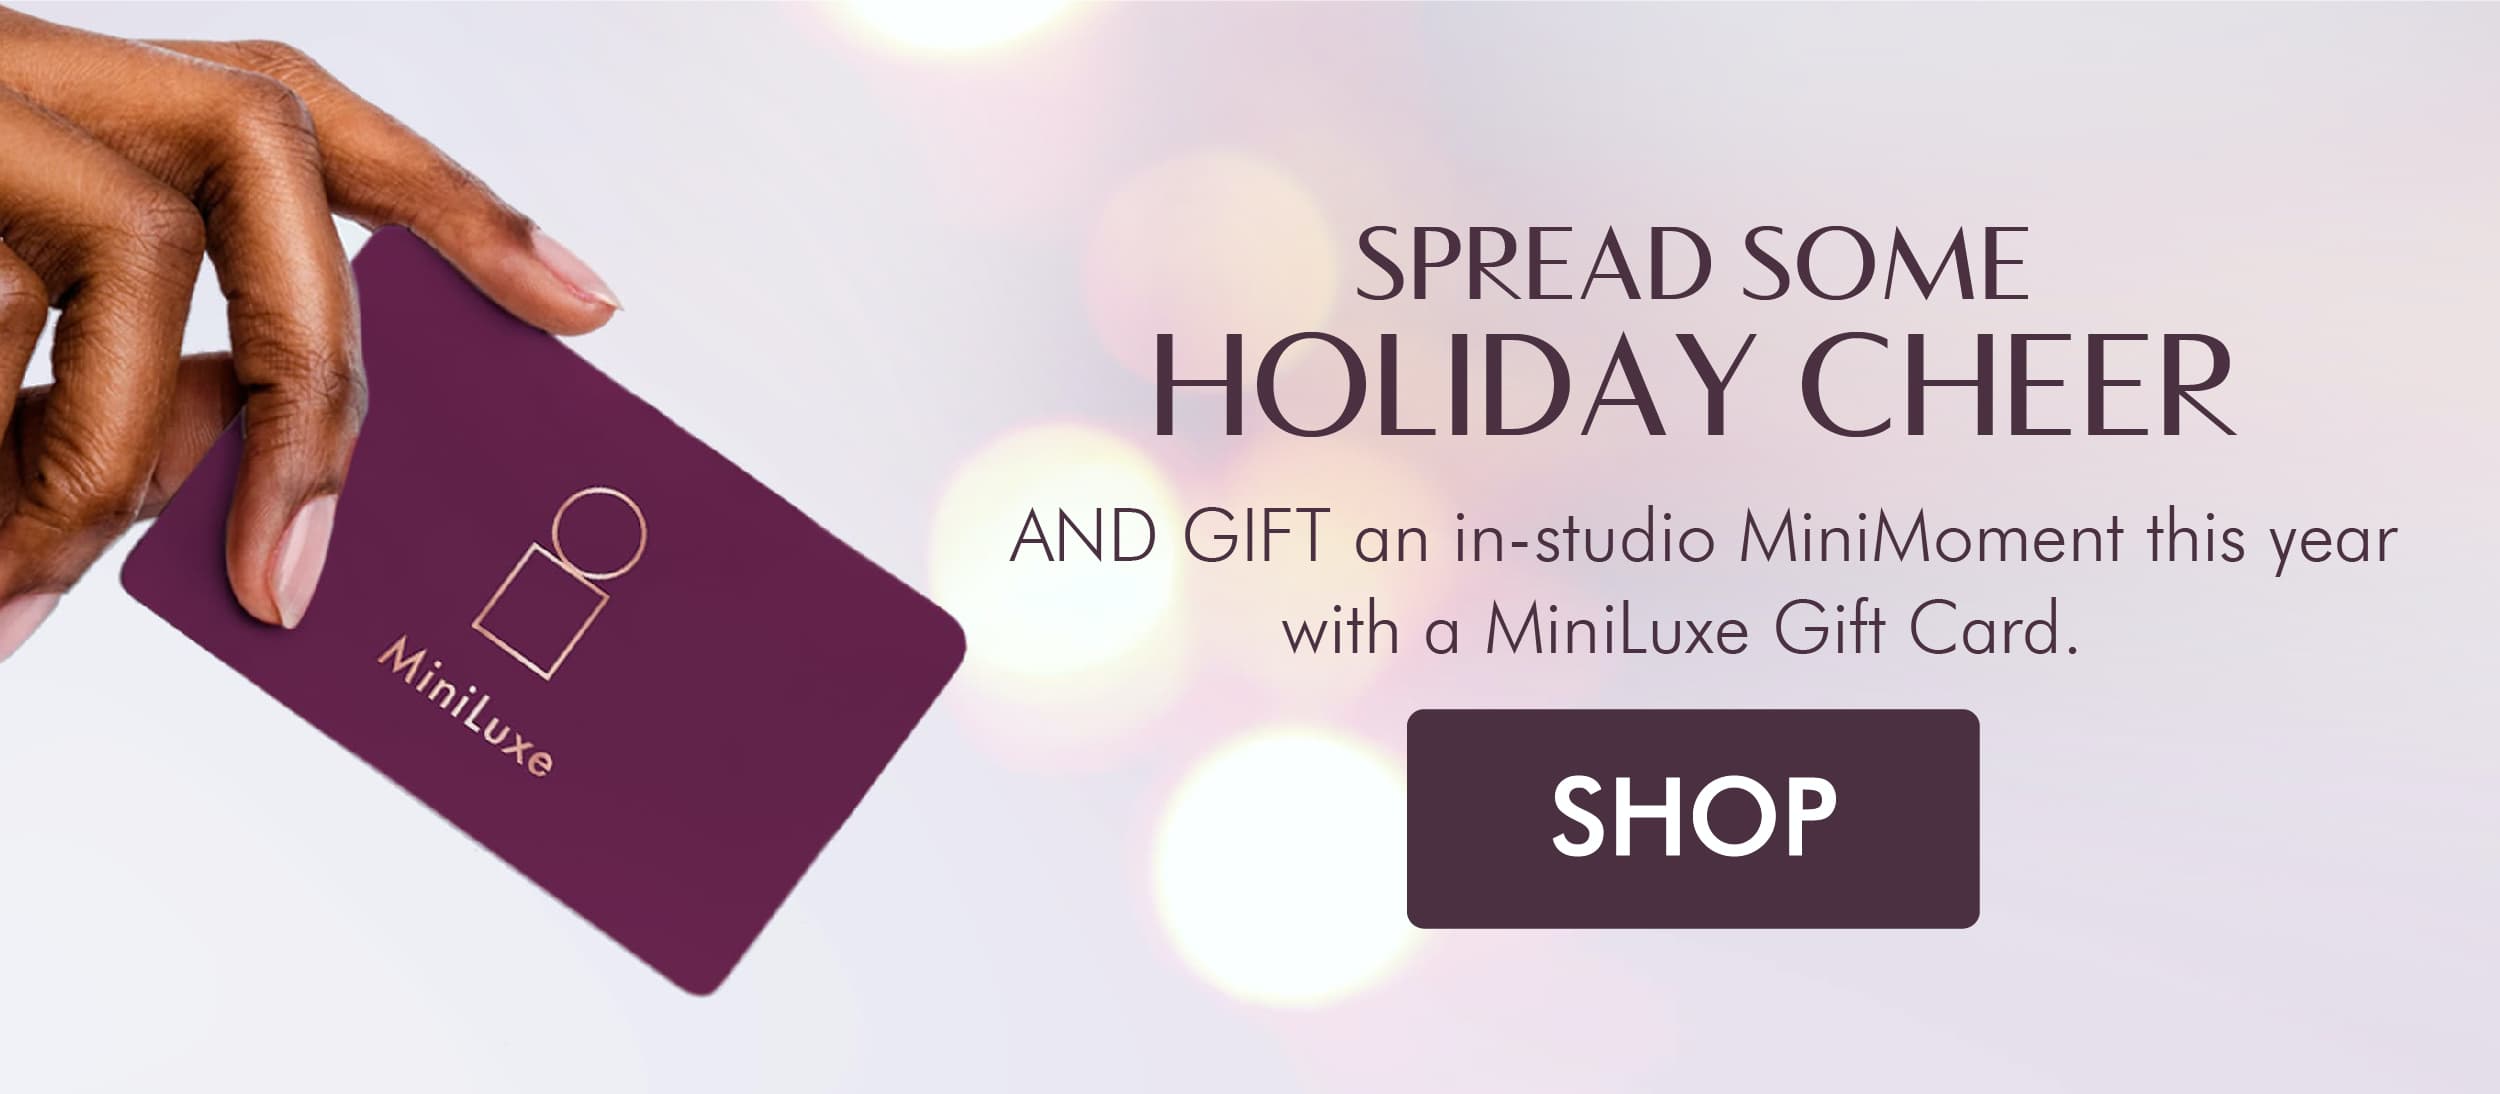 Gift An In-Studio MiniMoment This Year With A MiniLuxe Gift Card